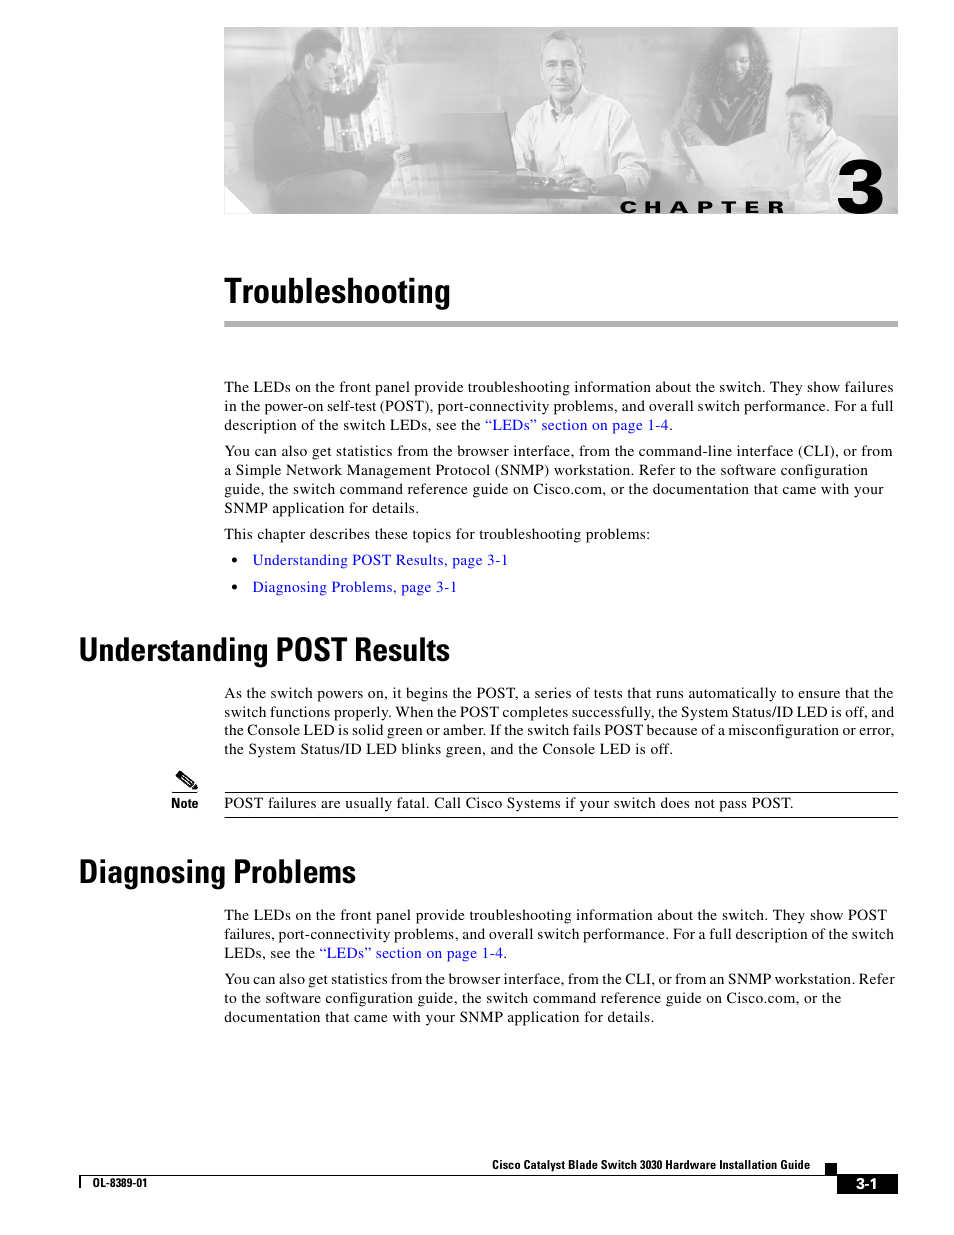 Troubleshooting, Understanding post results, Diagnosing problems | C h a p t e r, Chapter 3, “troubleshooting | Cisco 3030 User Manual | Page 49 / 72